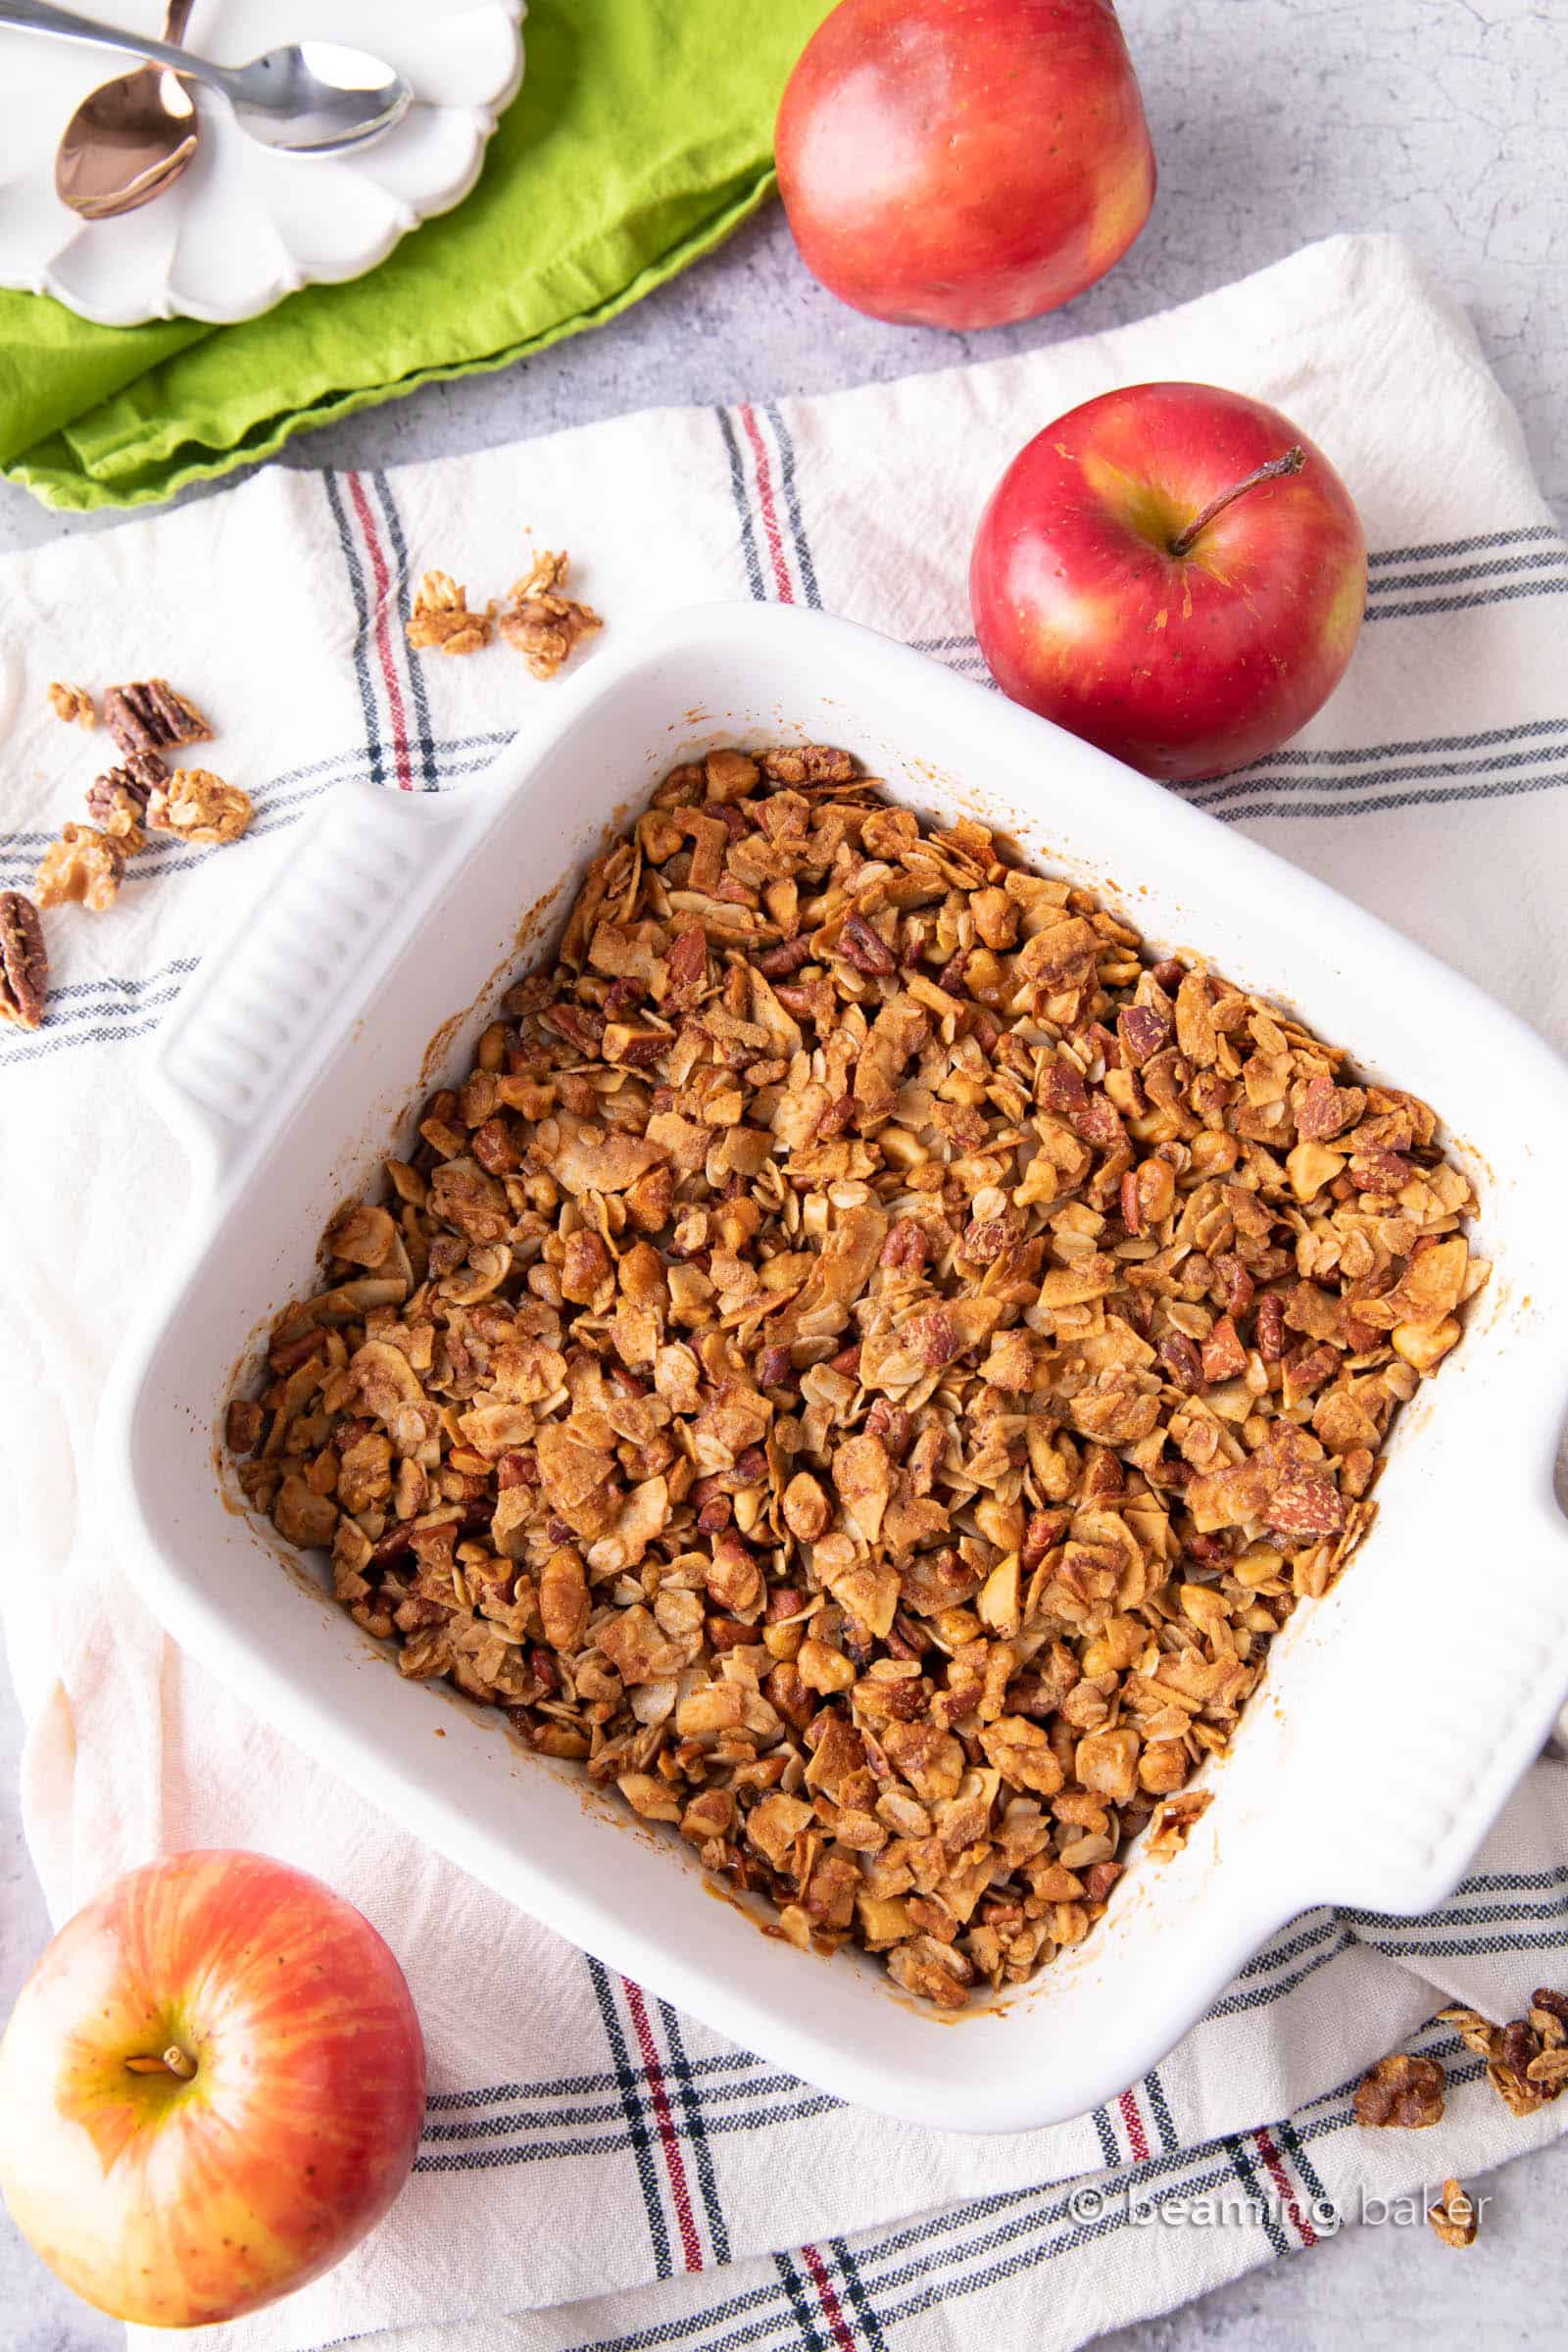 Healthy Apple Crisp: this healthy easy apple crisp recipe yields delicious crisp topping and warm apple filling for a guilt-free dessert made with healthy ingredients! #Healthy #Apple #Crisp | Recipe at BeamingBaker.com